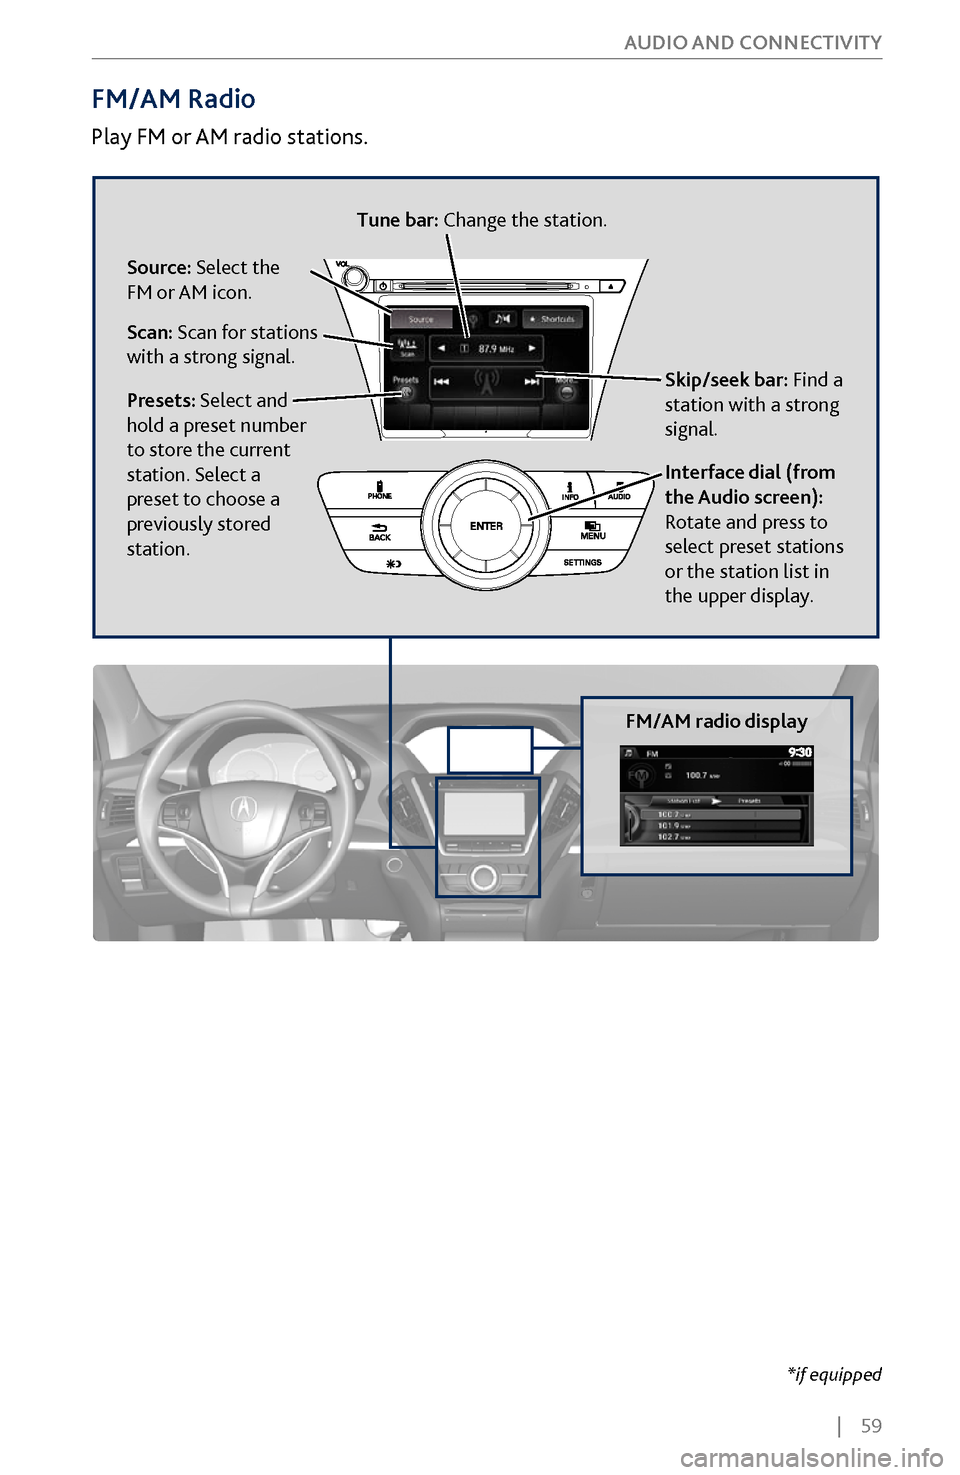 Acura MDX 2017 User Guide |    59
       AUDIO AND CONNECTIVITY
Interface dial (from 
the Audio screen): 
Rotate and press to 
select preset stations 
or the station list in 
the upper display.
FM/AM Radio
Play FM or AM radio 